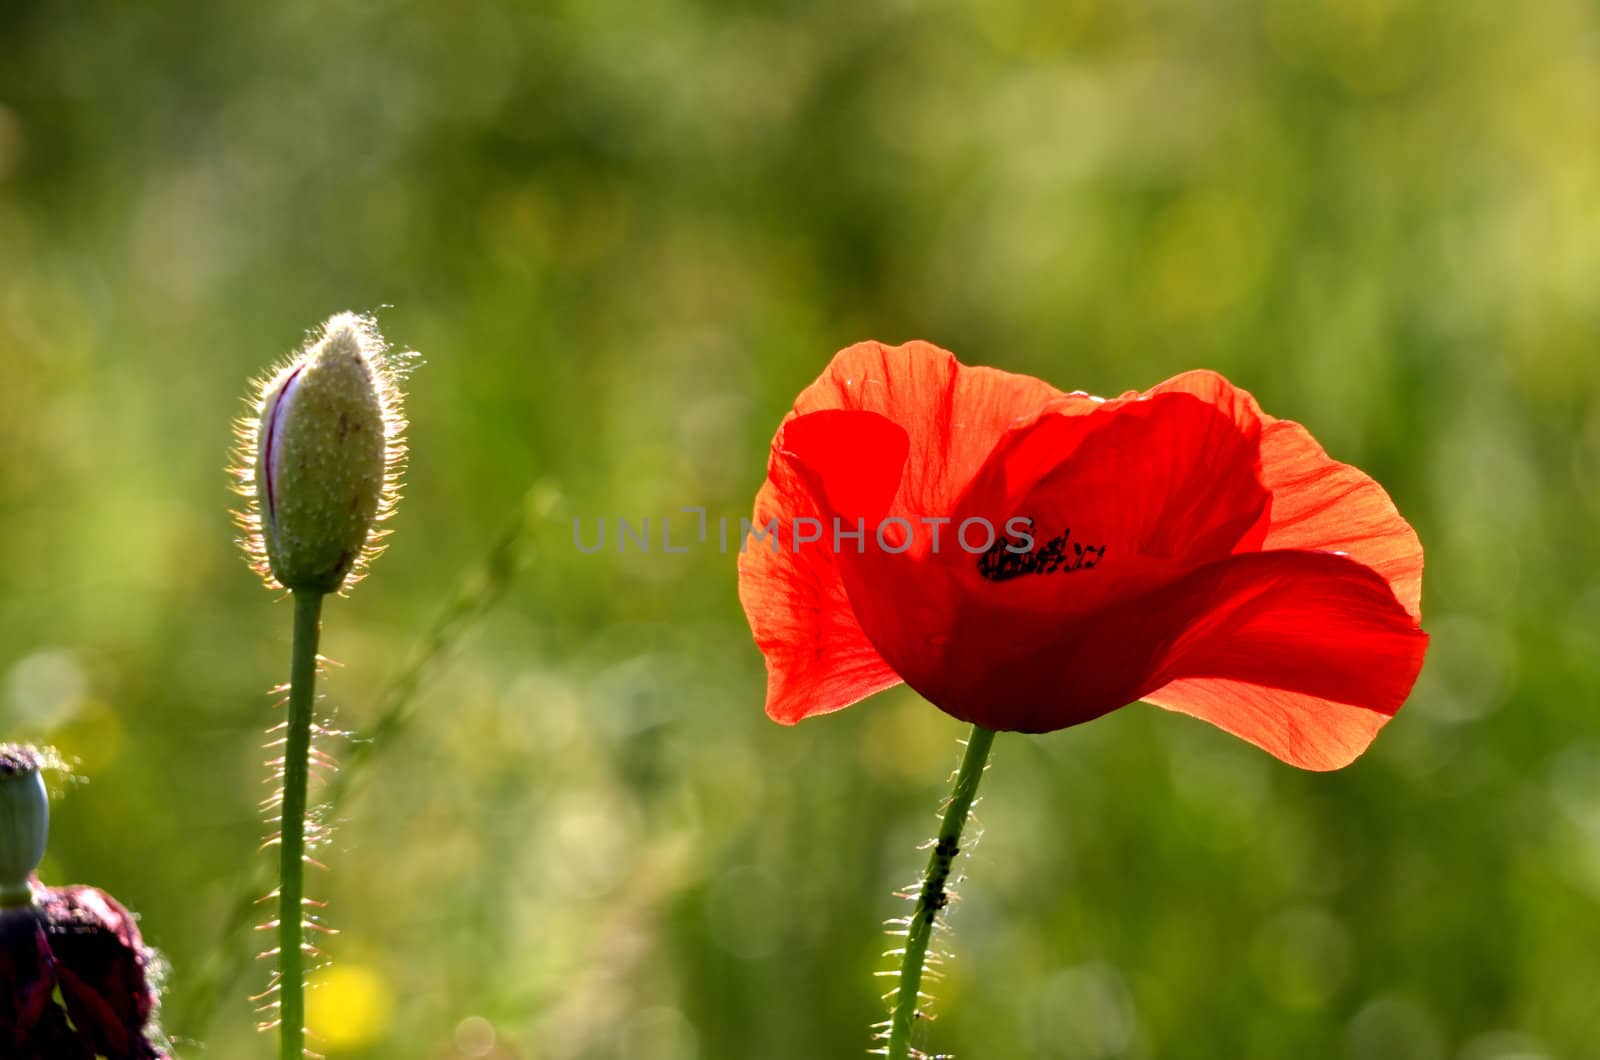 The photo shows a poppy flower on a blurred background of grain growing in a field.